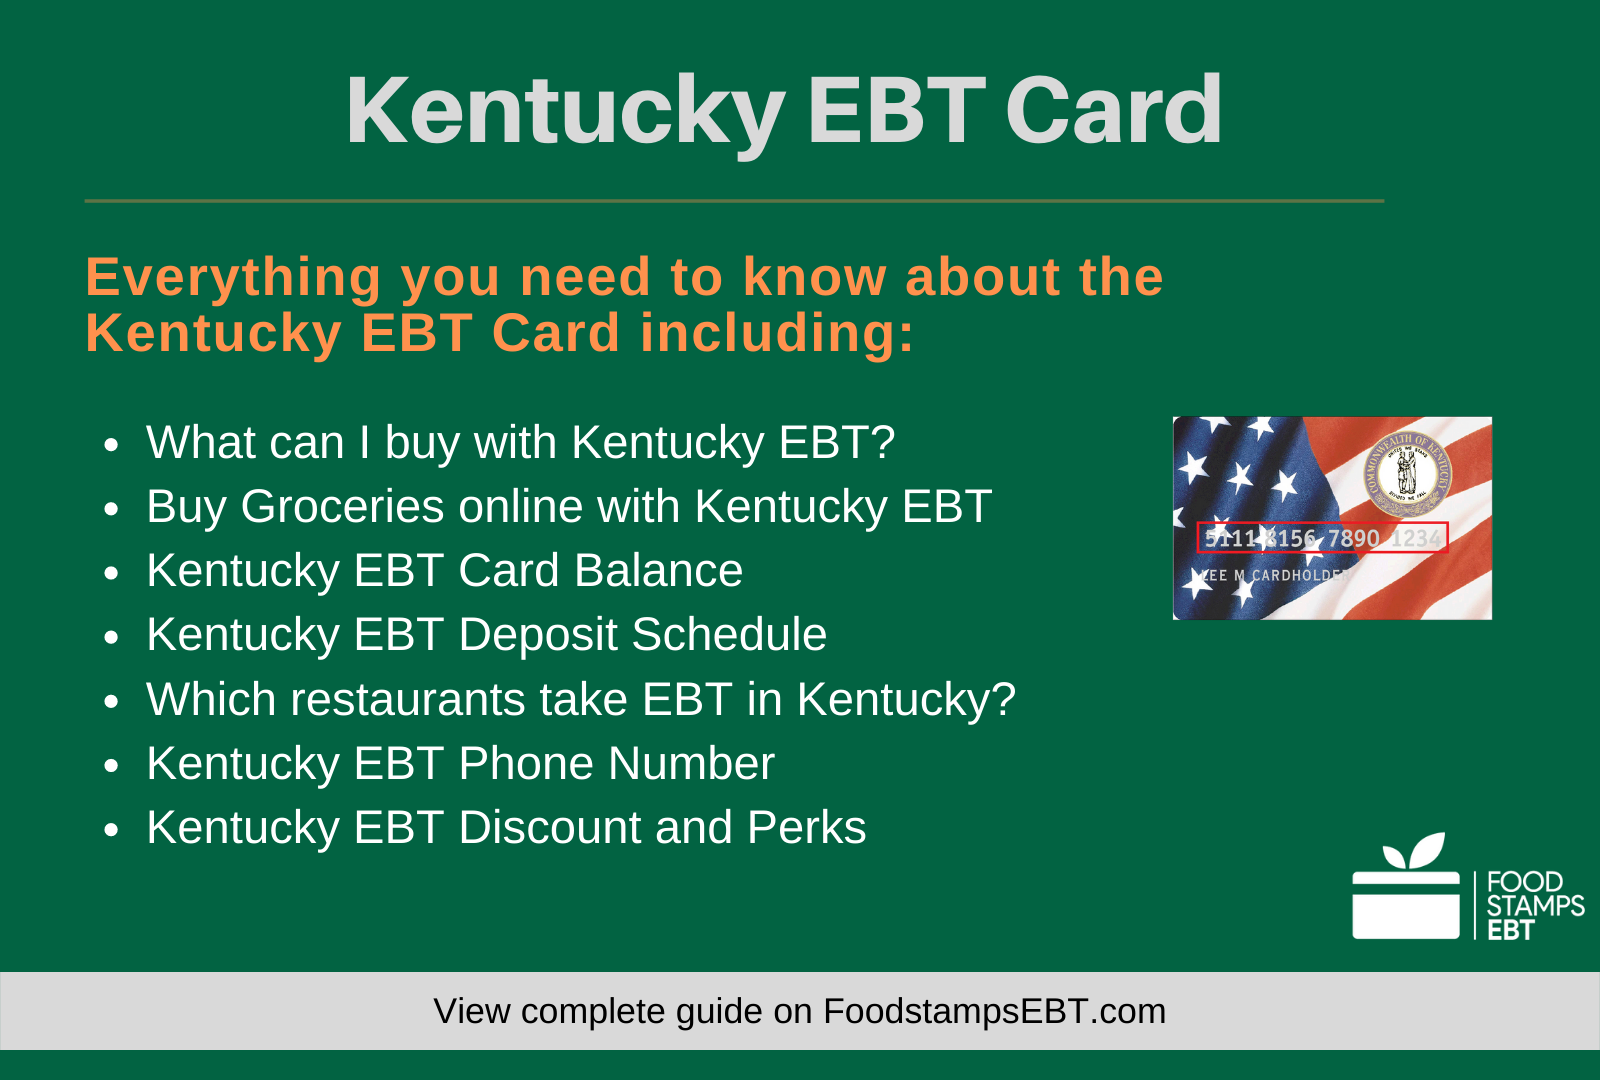 "Kentucky EBT Card Questions and Answers"